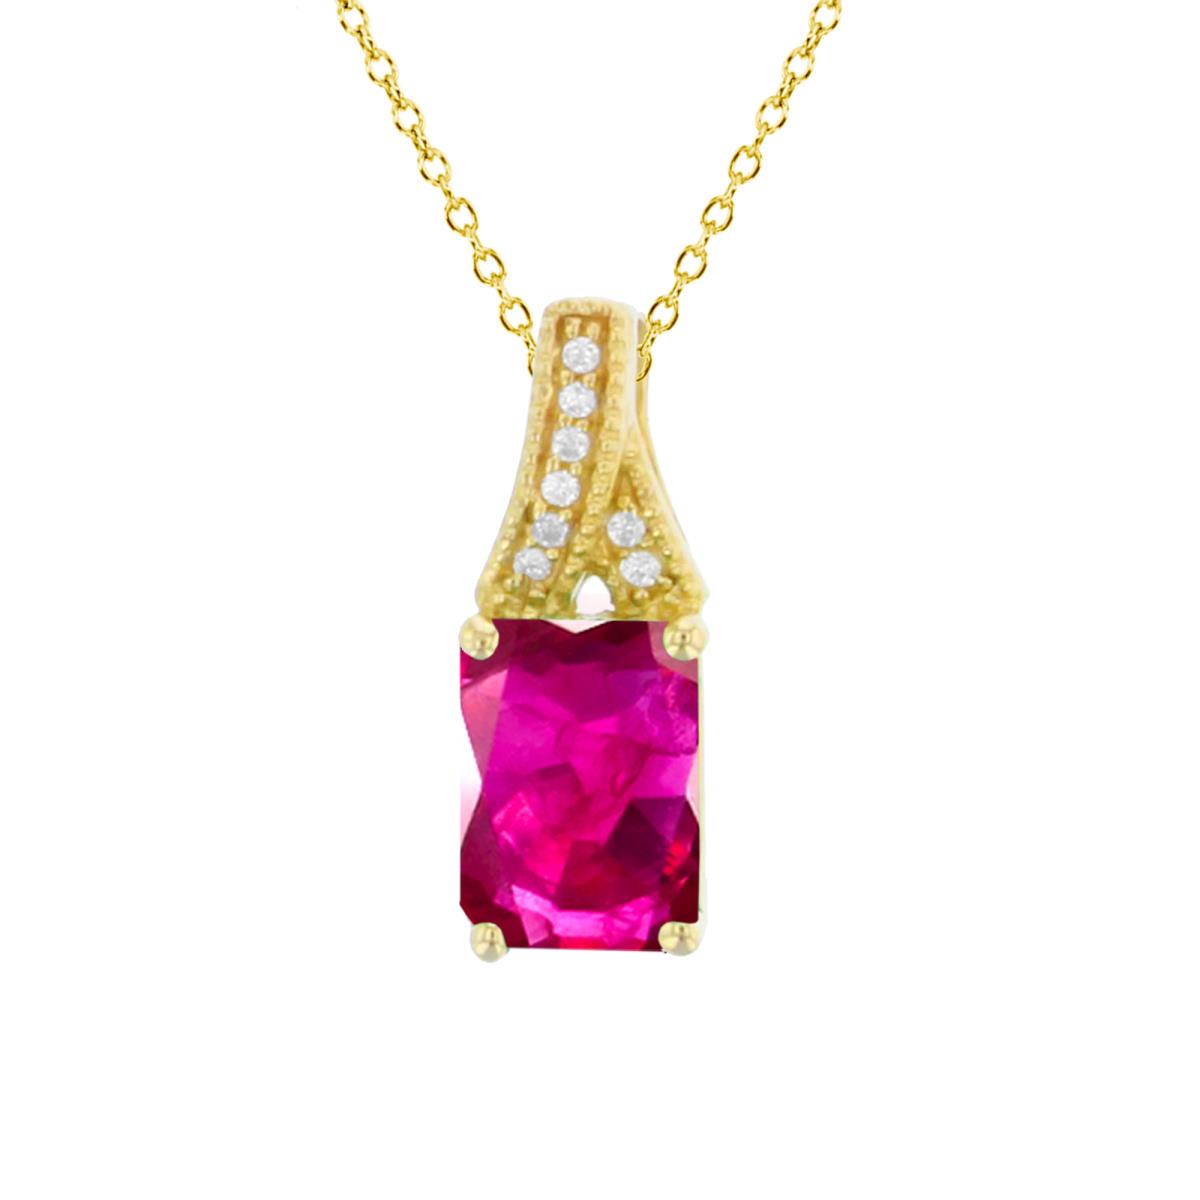 10K Yellow Gold 0.01cttw Rnd Diamonds & 7x5mm Oct Glass Filled Ruby 18"Necklace